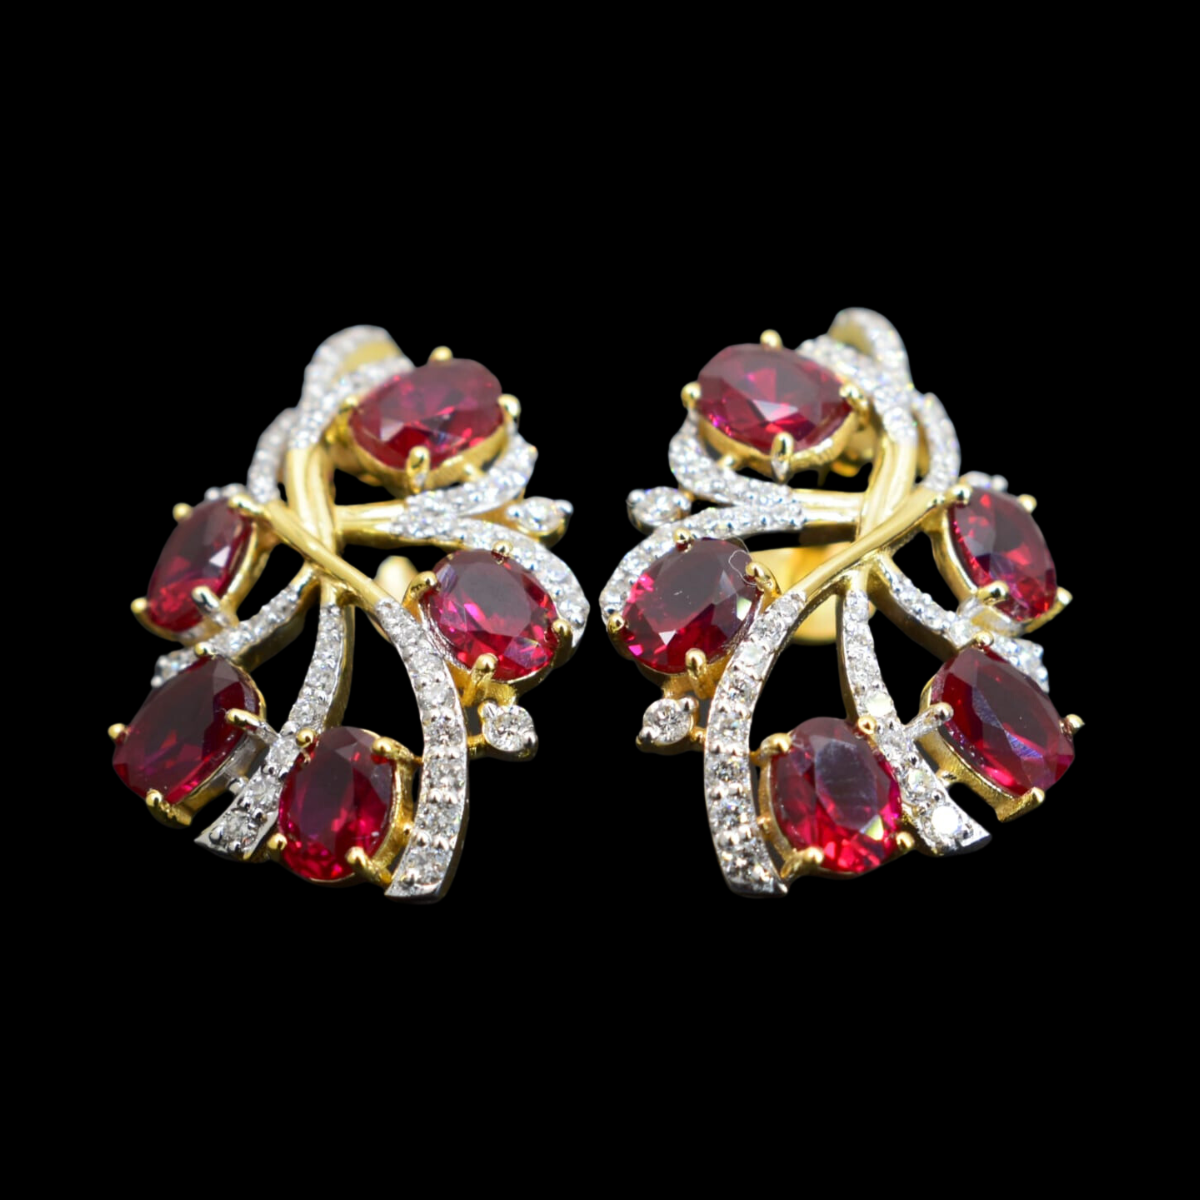 “Passion in Bloom: Ruby Radiance Meets Diamond Brilliance in Our Exquisite Earrings”